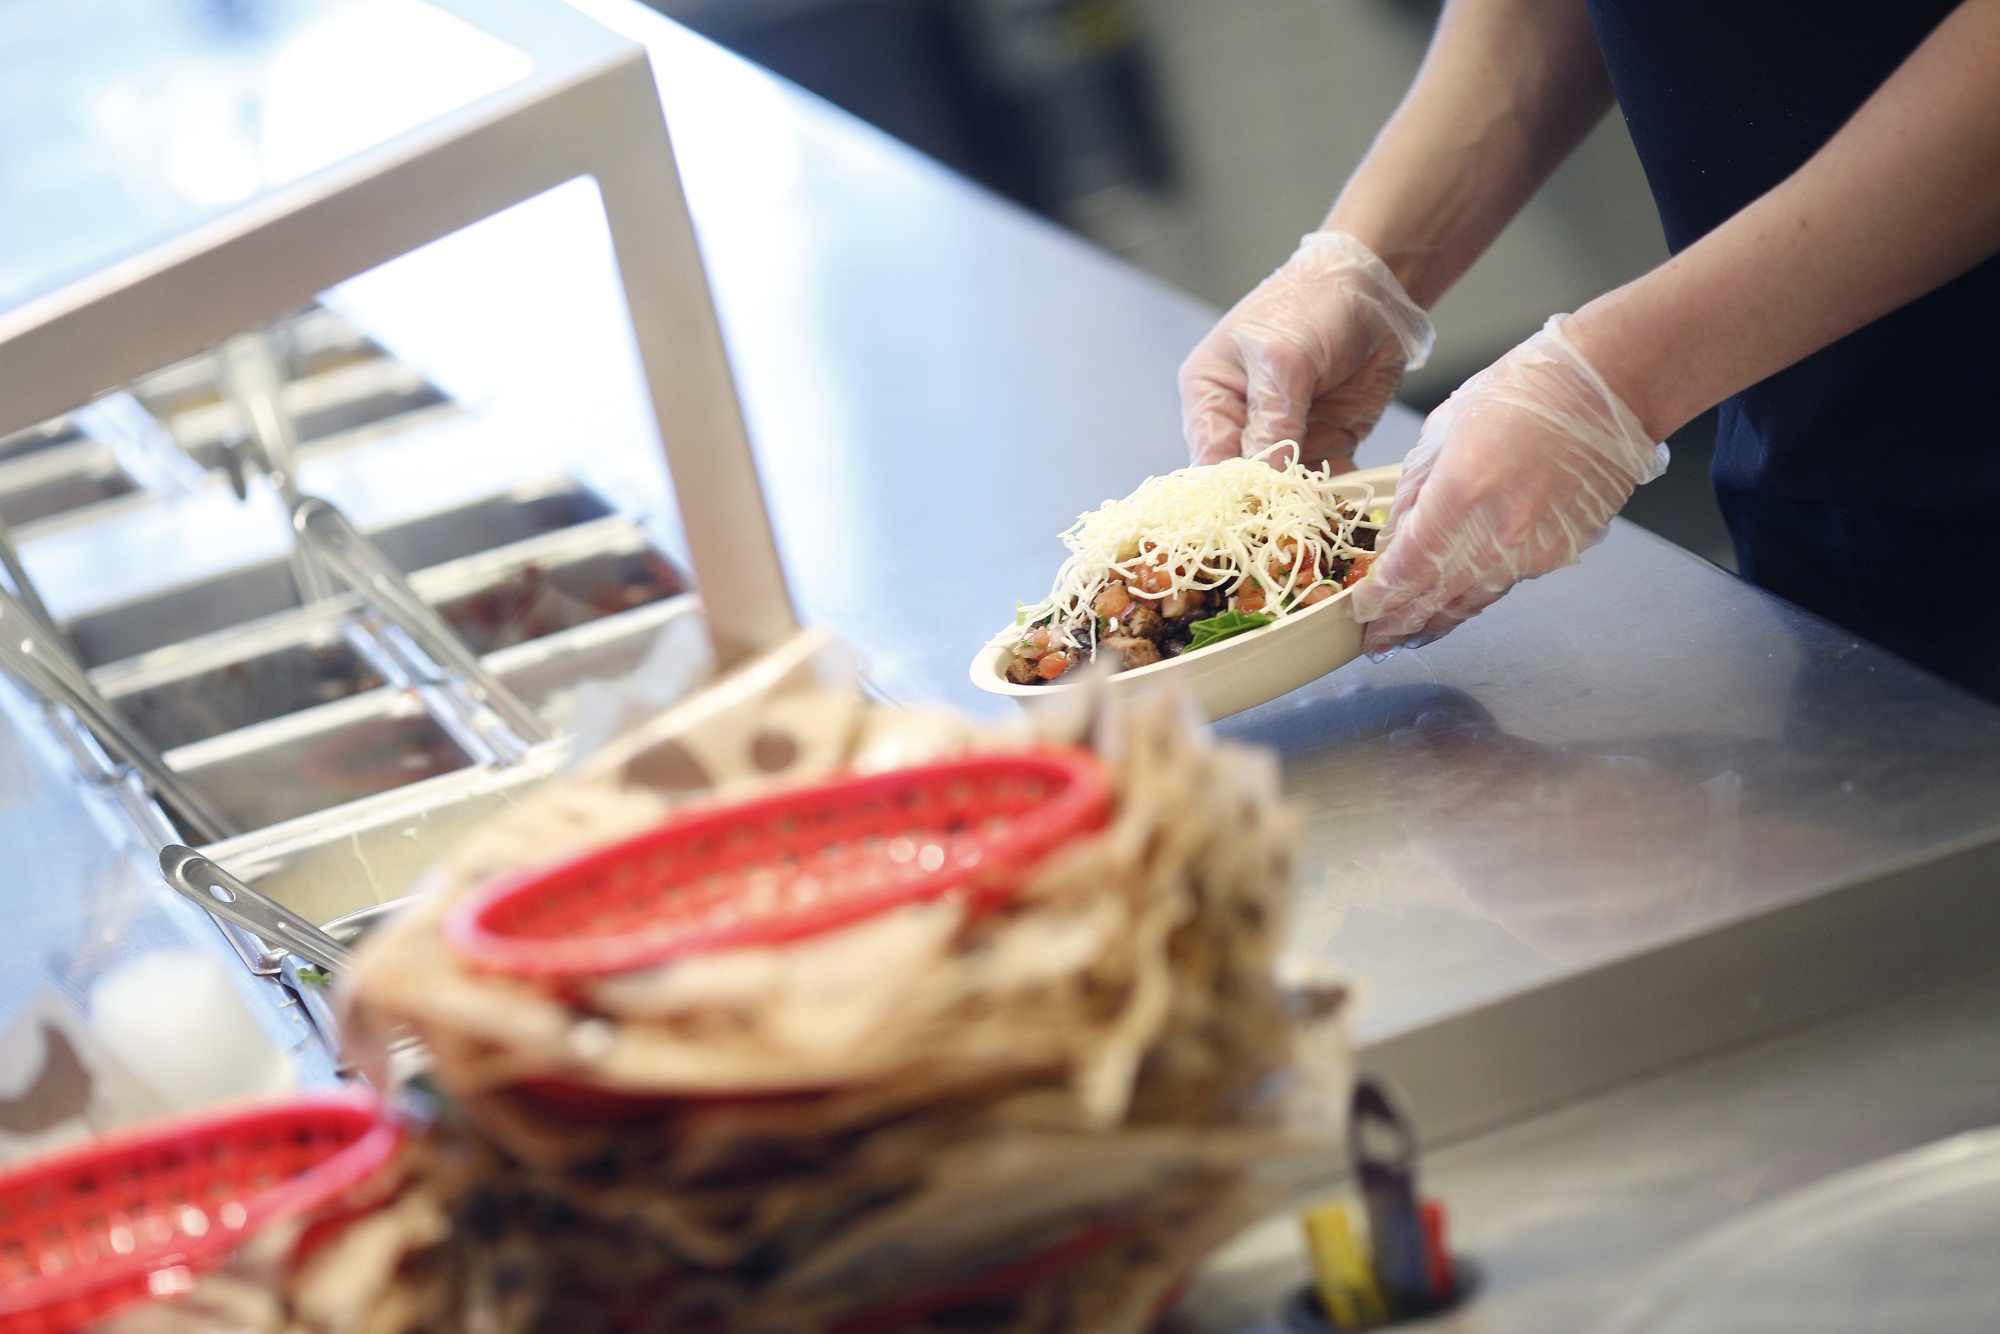 How Much Does Chipotle Pay? CMG Raises Average Hourly Wage to 15